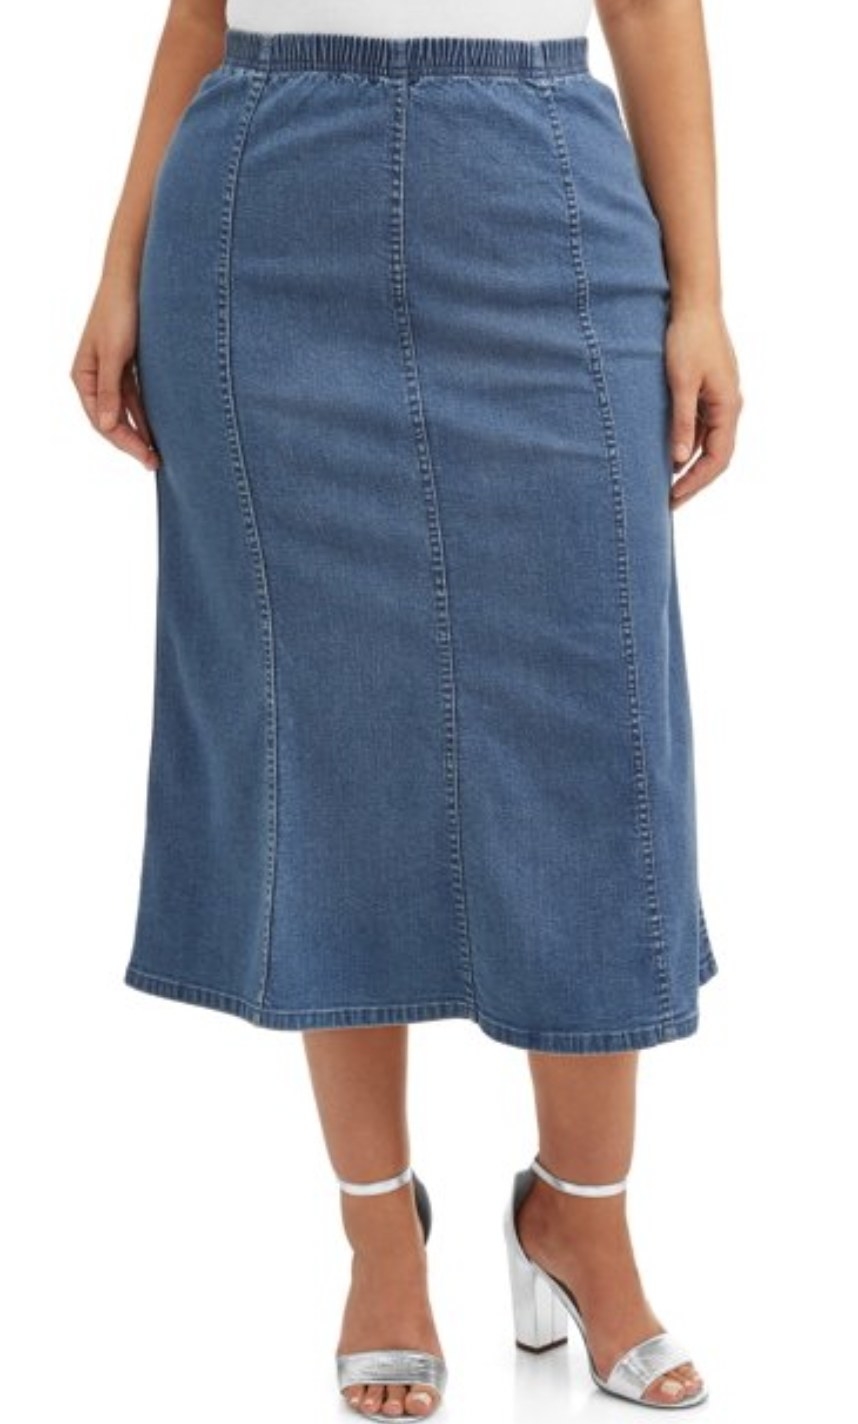 a front view of a model wearing the denim skirt that flares at the end